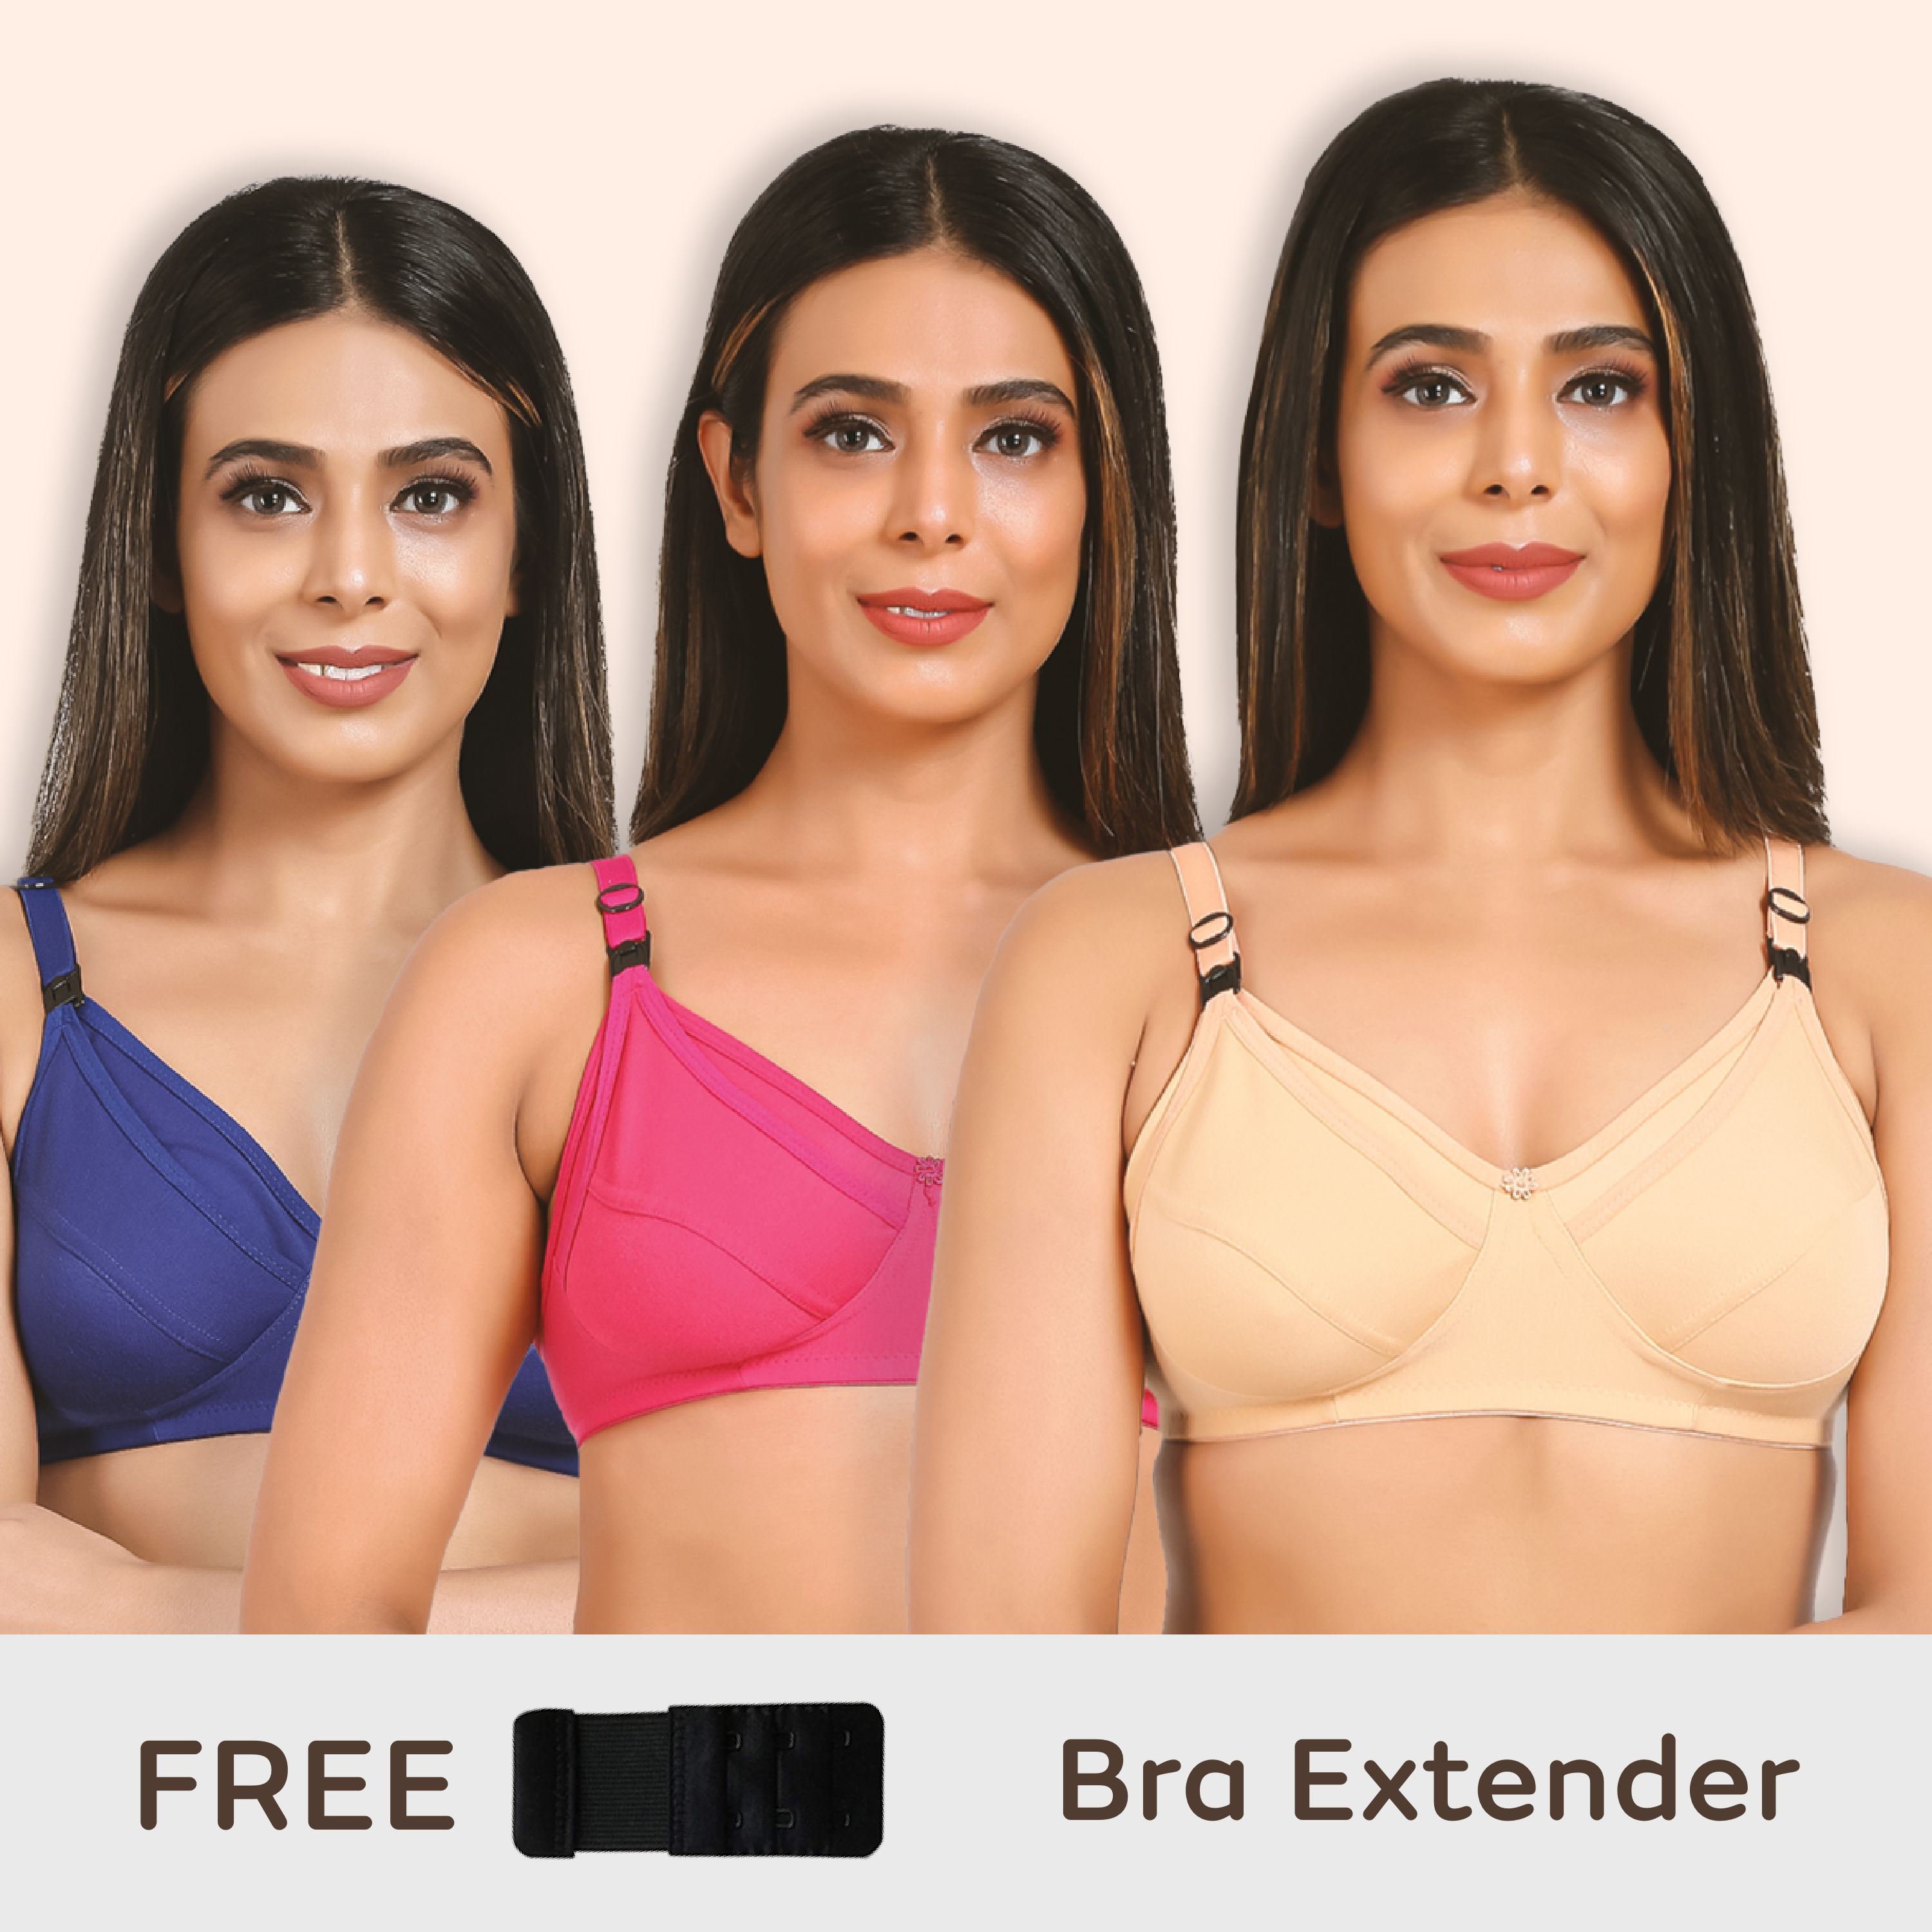 Maternity/Nursing Bras Non-Wired, Non-Padded - Pack of 3 with free Bra Extender (Sandalwood, Persian Blue & Dark pink) 34 B